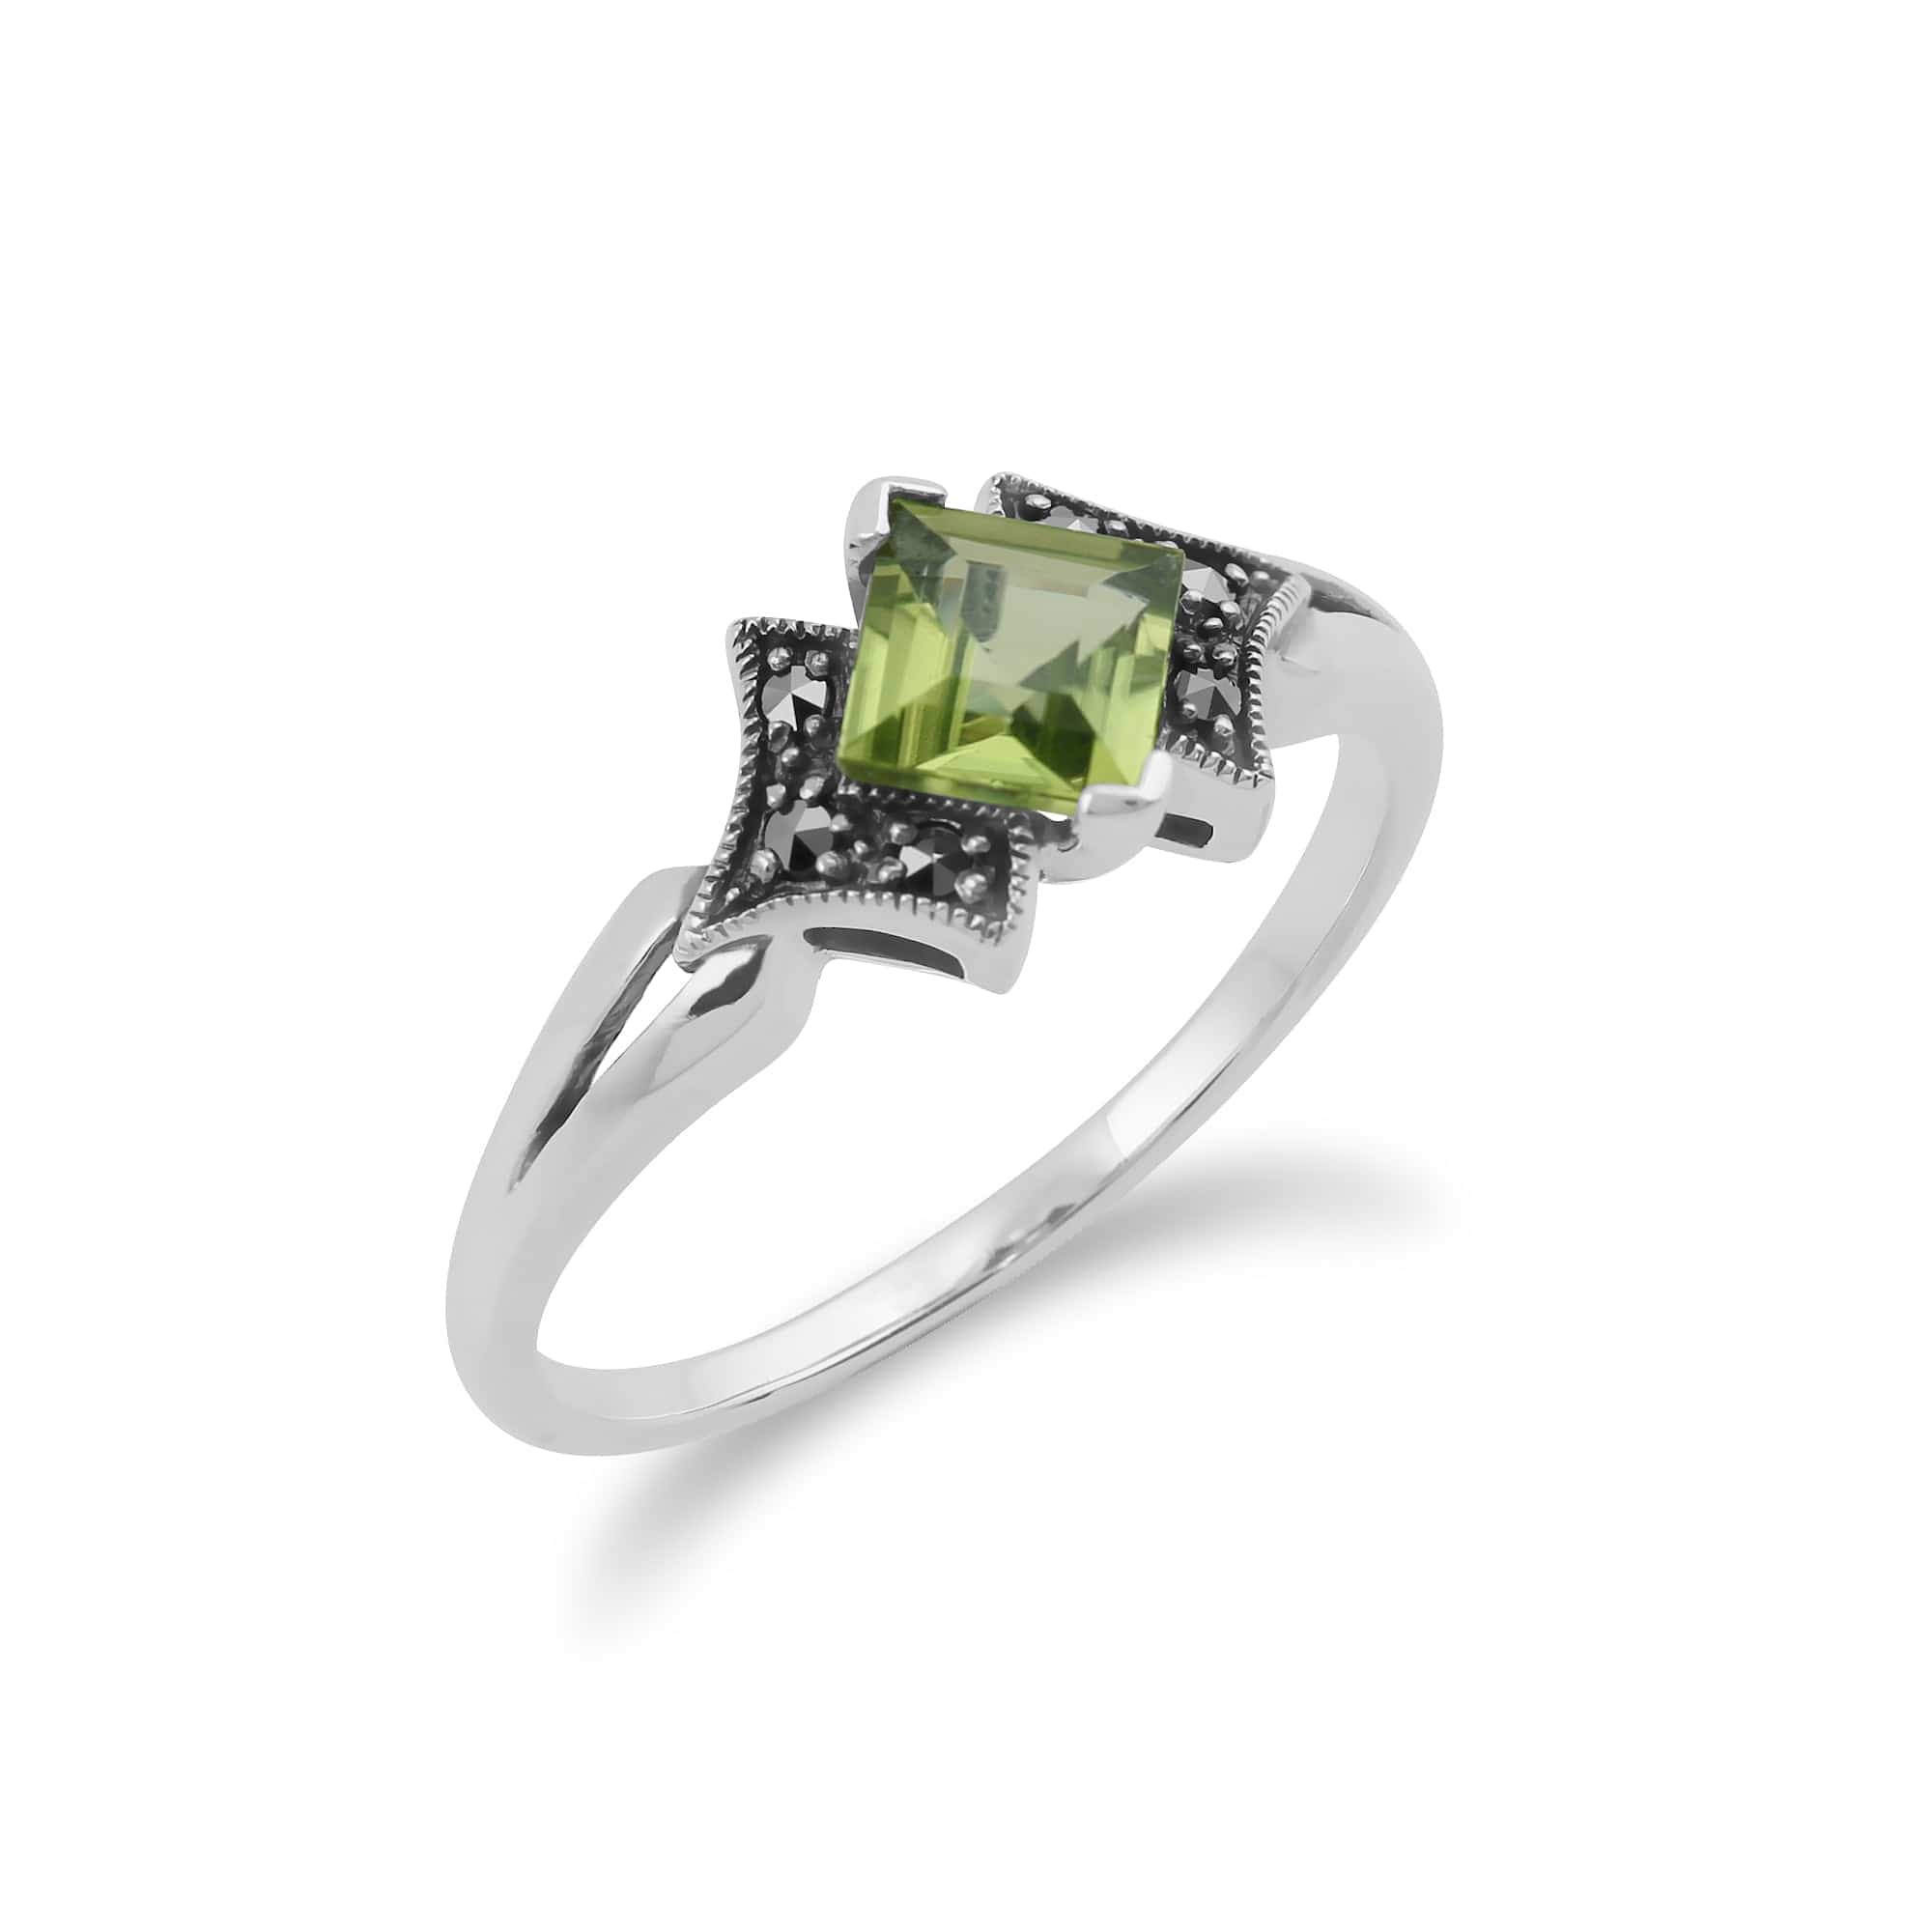 214R393304925 Art Deco Style Square Peridot & Marcasite Ring in 925 Sterling Silver 2